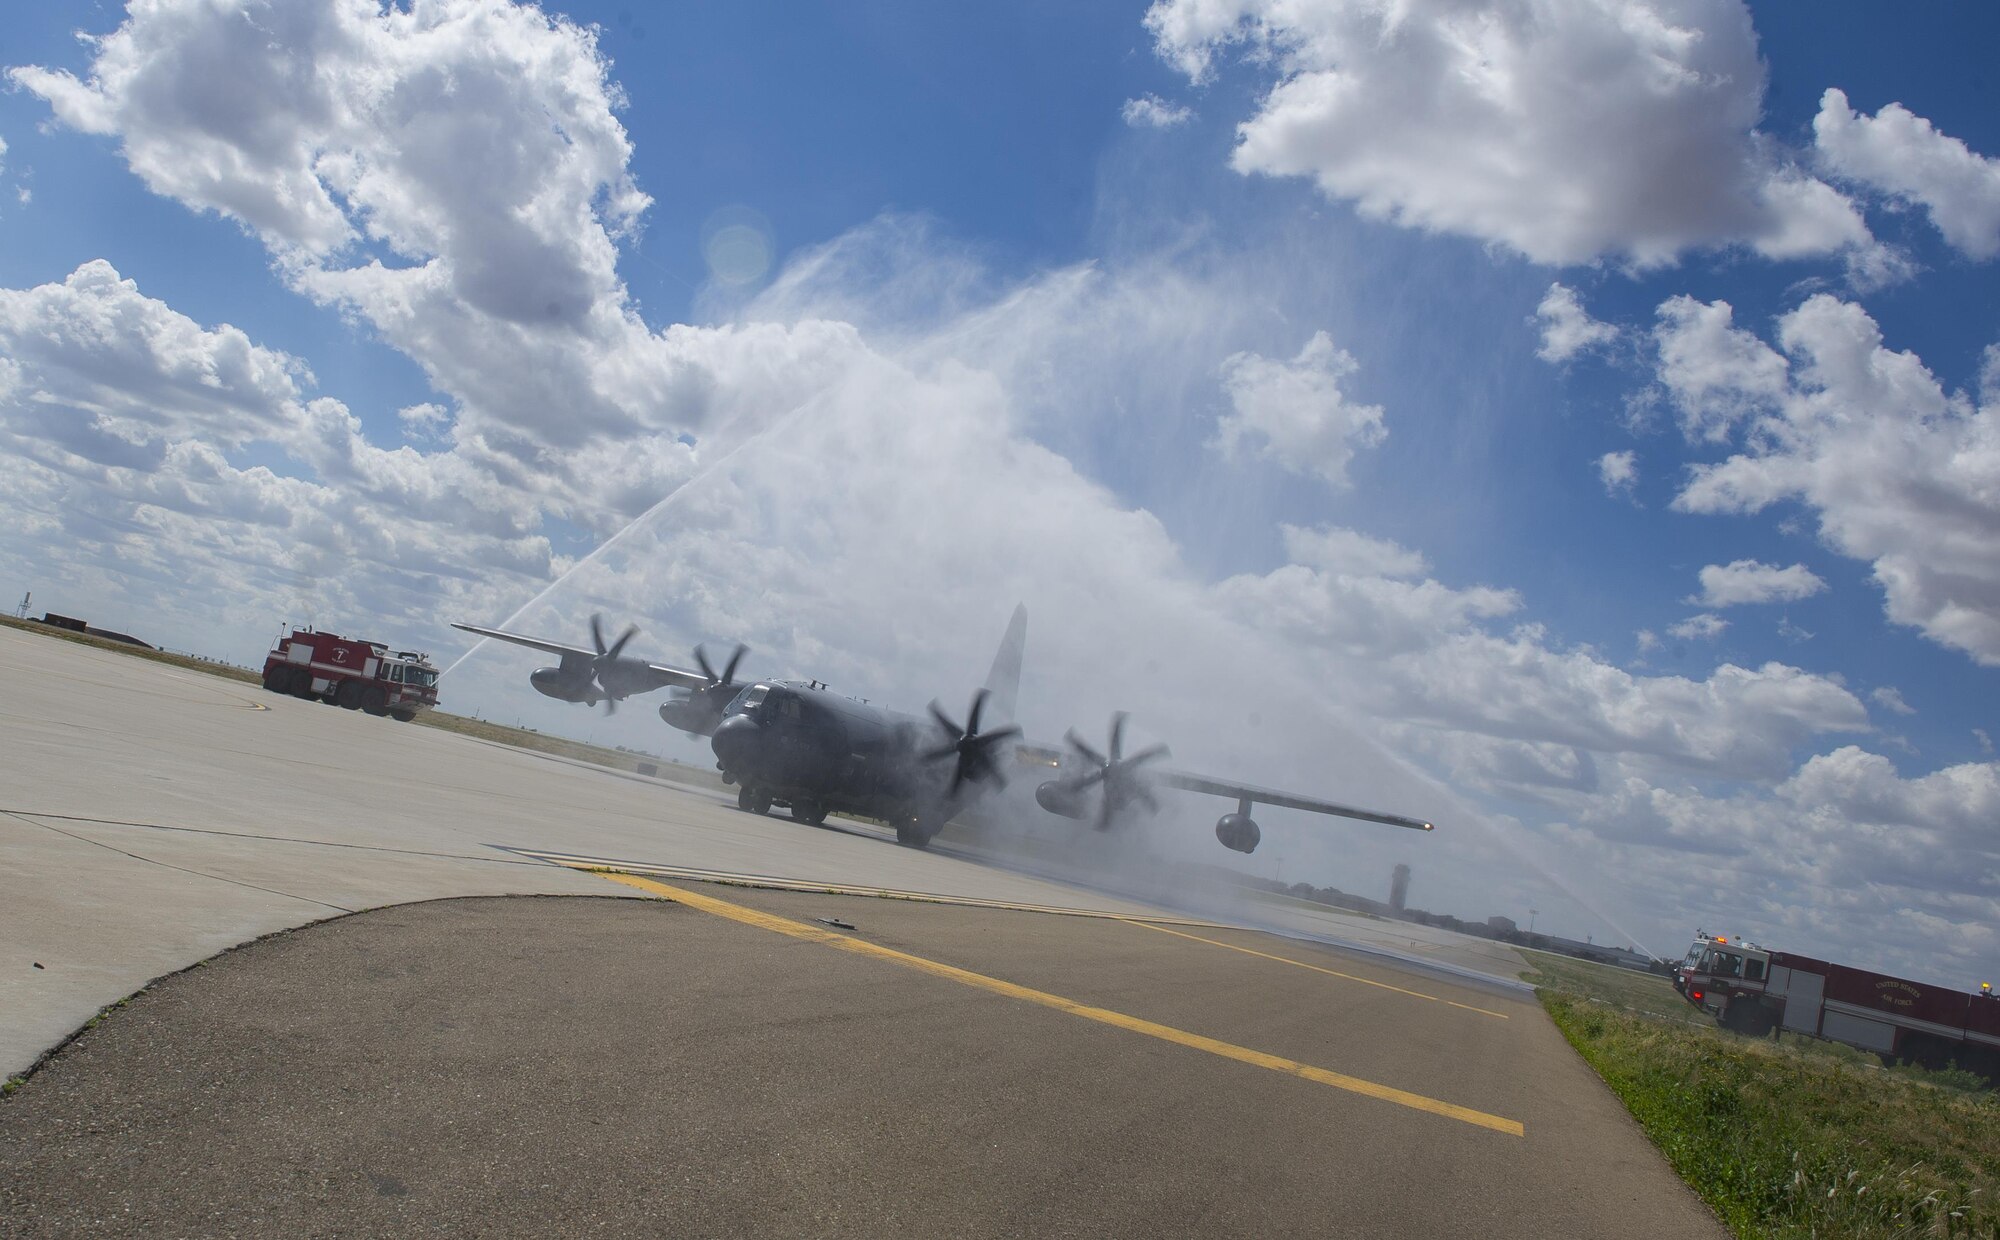 A MC-130J Commando II is sprayed by firetrucks, known as a “water salute,” as it taxis on the flightline during the ‘fini flight’ of its pilot, Col. Benjamin Maitre, former 27th Special Operations Wing commander, at Cannon Air Force Base, New Mexico, Jun. 1, 2017. The tradition of spraying plumes of water over aircraft can signal the end of the pilot’s career there or mark the beginning or end of the aircraft’s life. Dating back to World War II, the U.S. military has celebrated pilots’ and other experienced officers’ final flights either at their current unit or their career. Pilots use these celebrations as another opportunity to help train accompanying Airmen on their roles aboard the aircraft to ensure mission readiness. (U.S. Air Force photo by Senior Airman Lane T. Plummer)